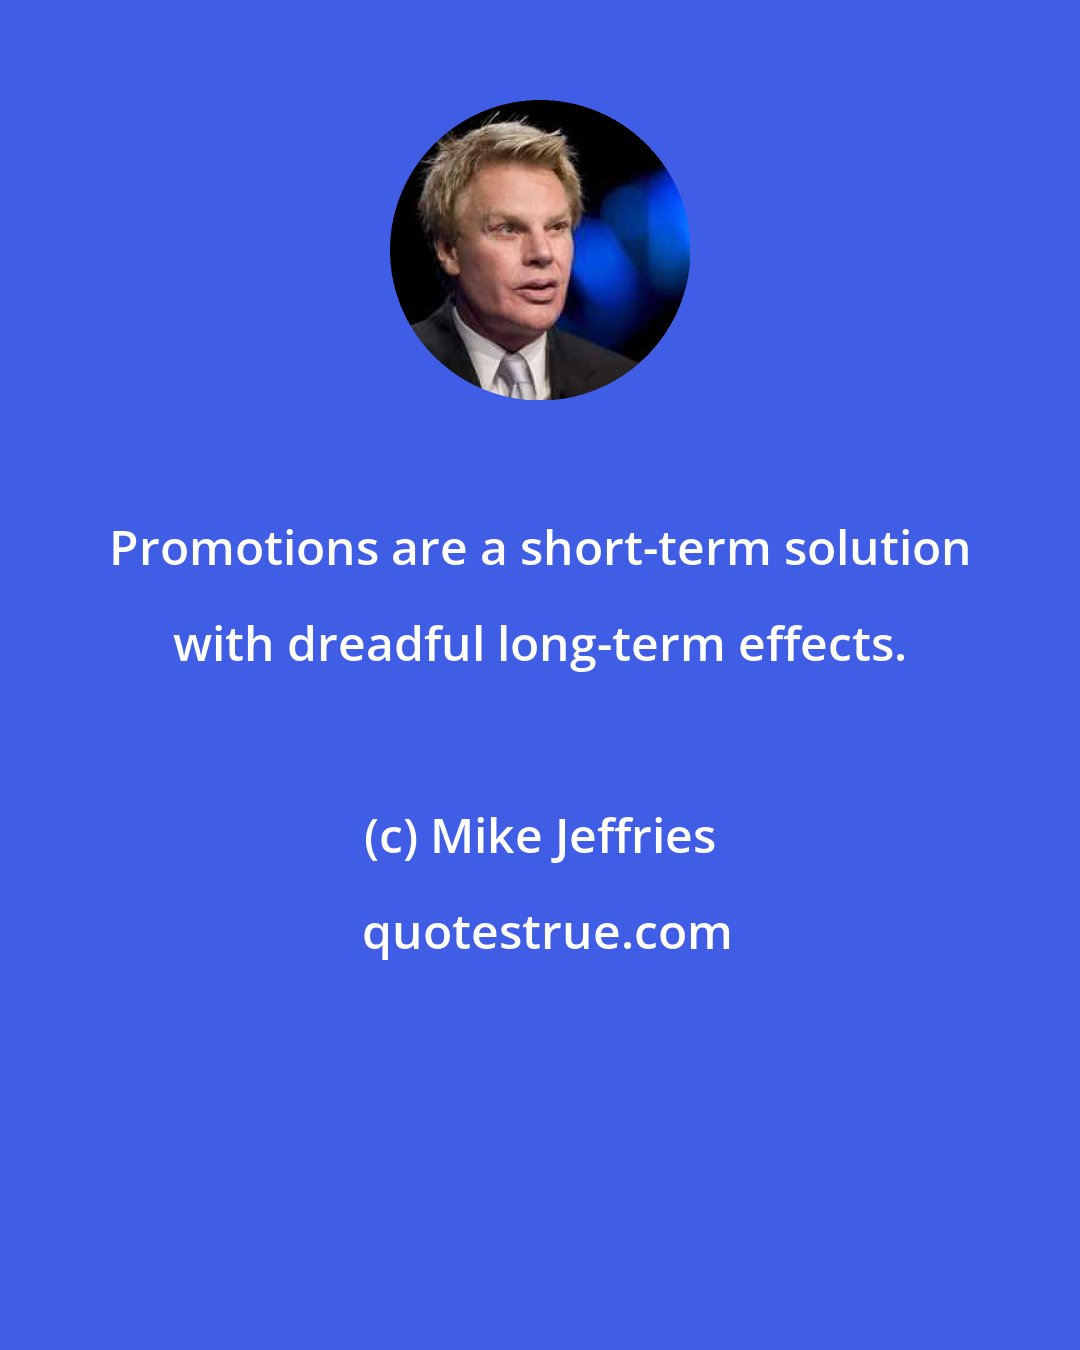 Mike Jeffries: Promotions are a short-term solution with dreadful long-term effects.